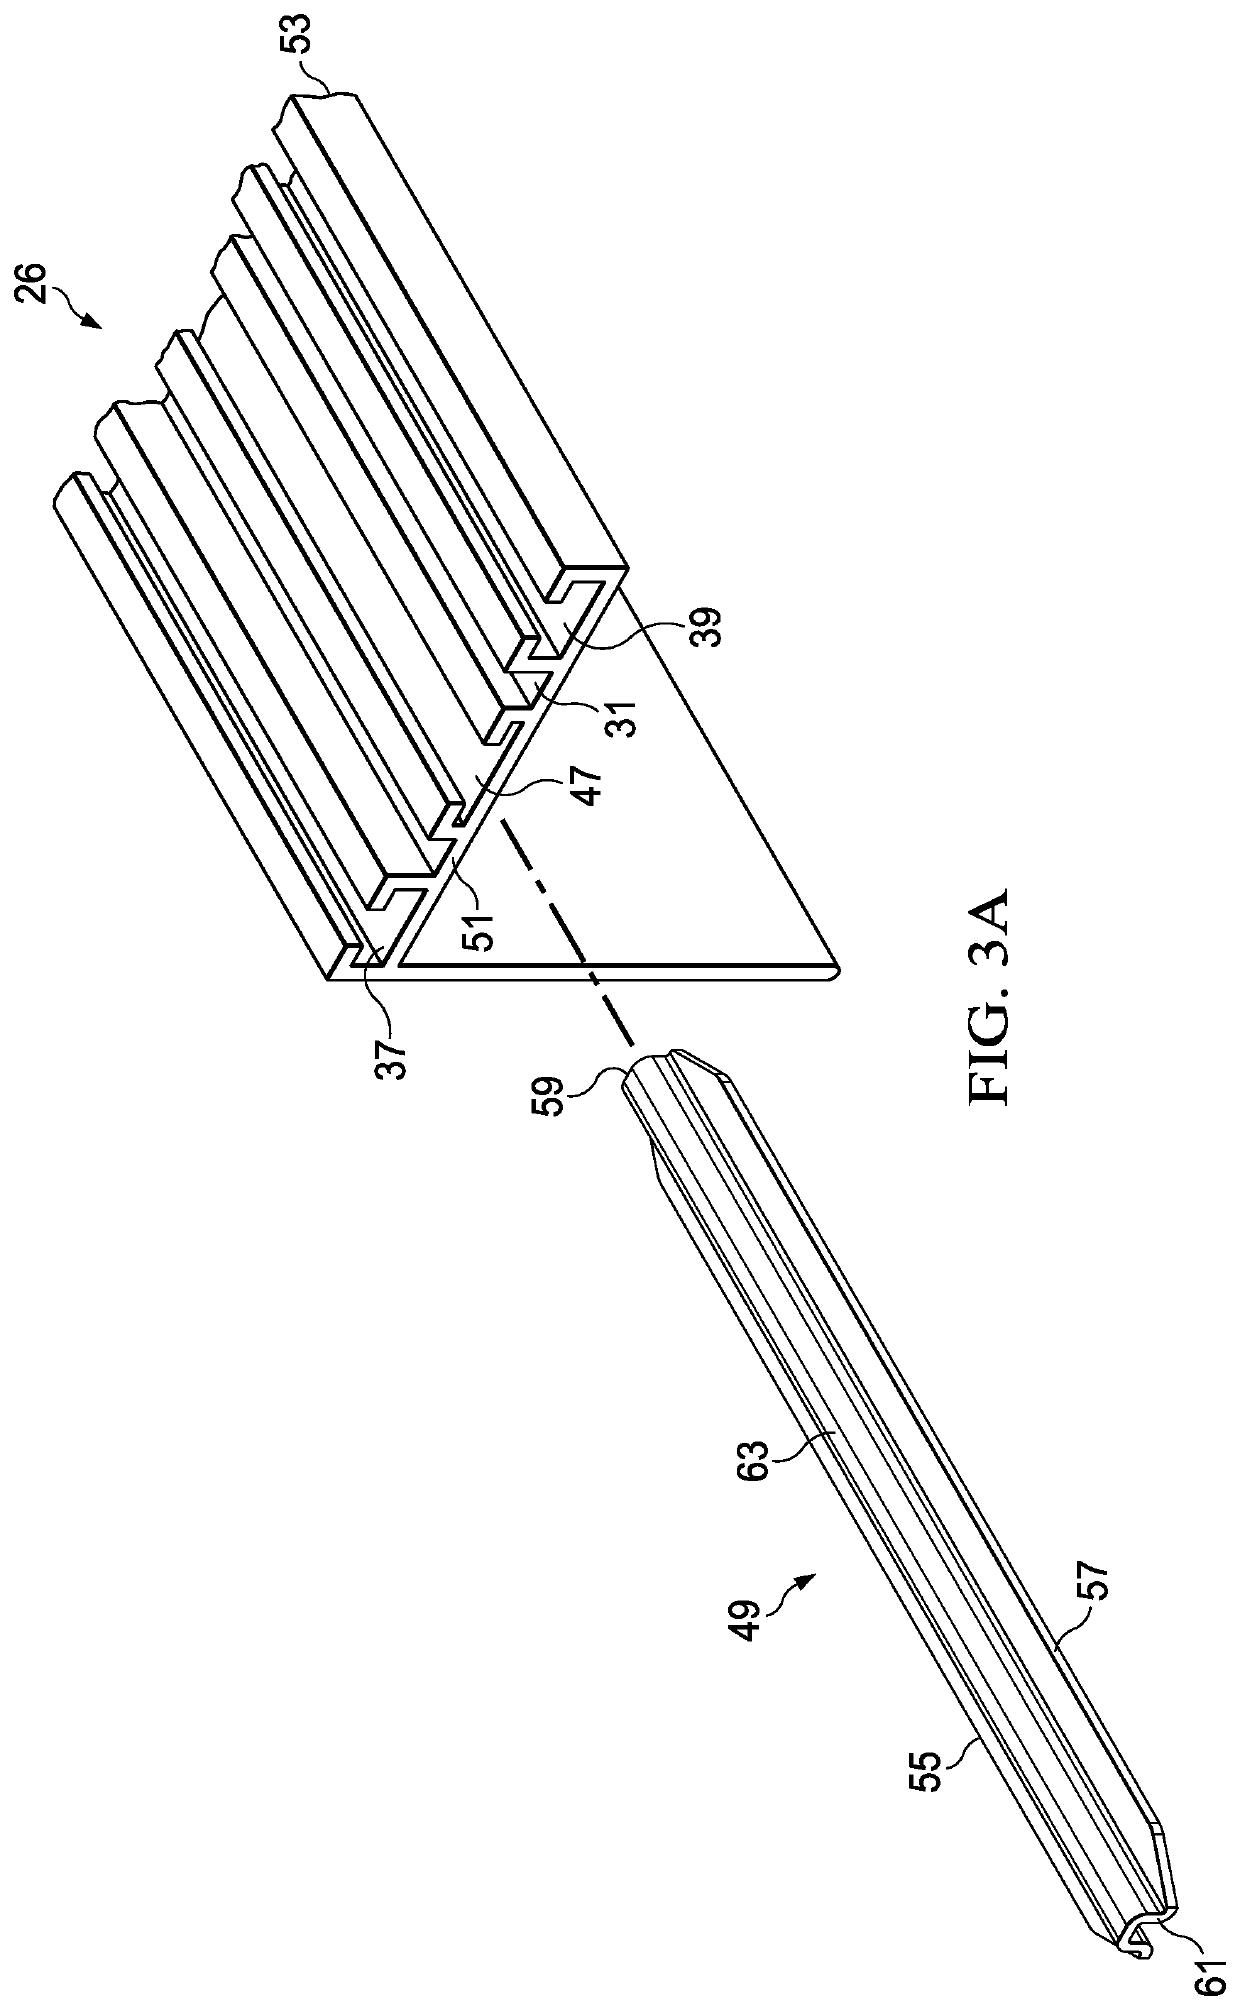 Method of using and distributing a weather seal assembly for an overhead door